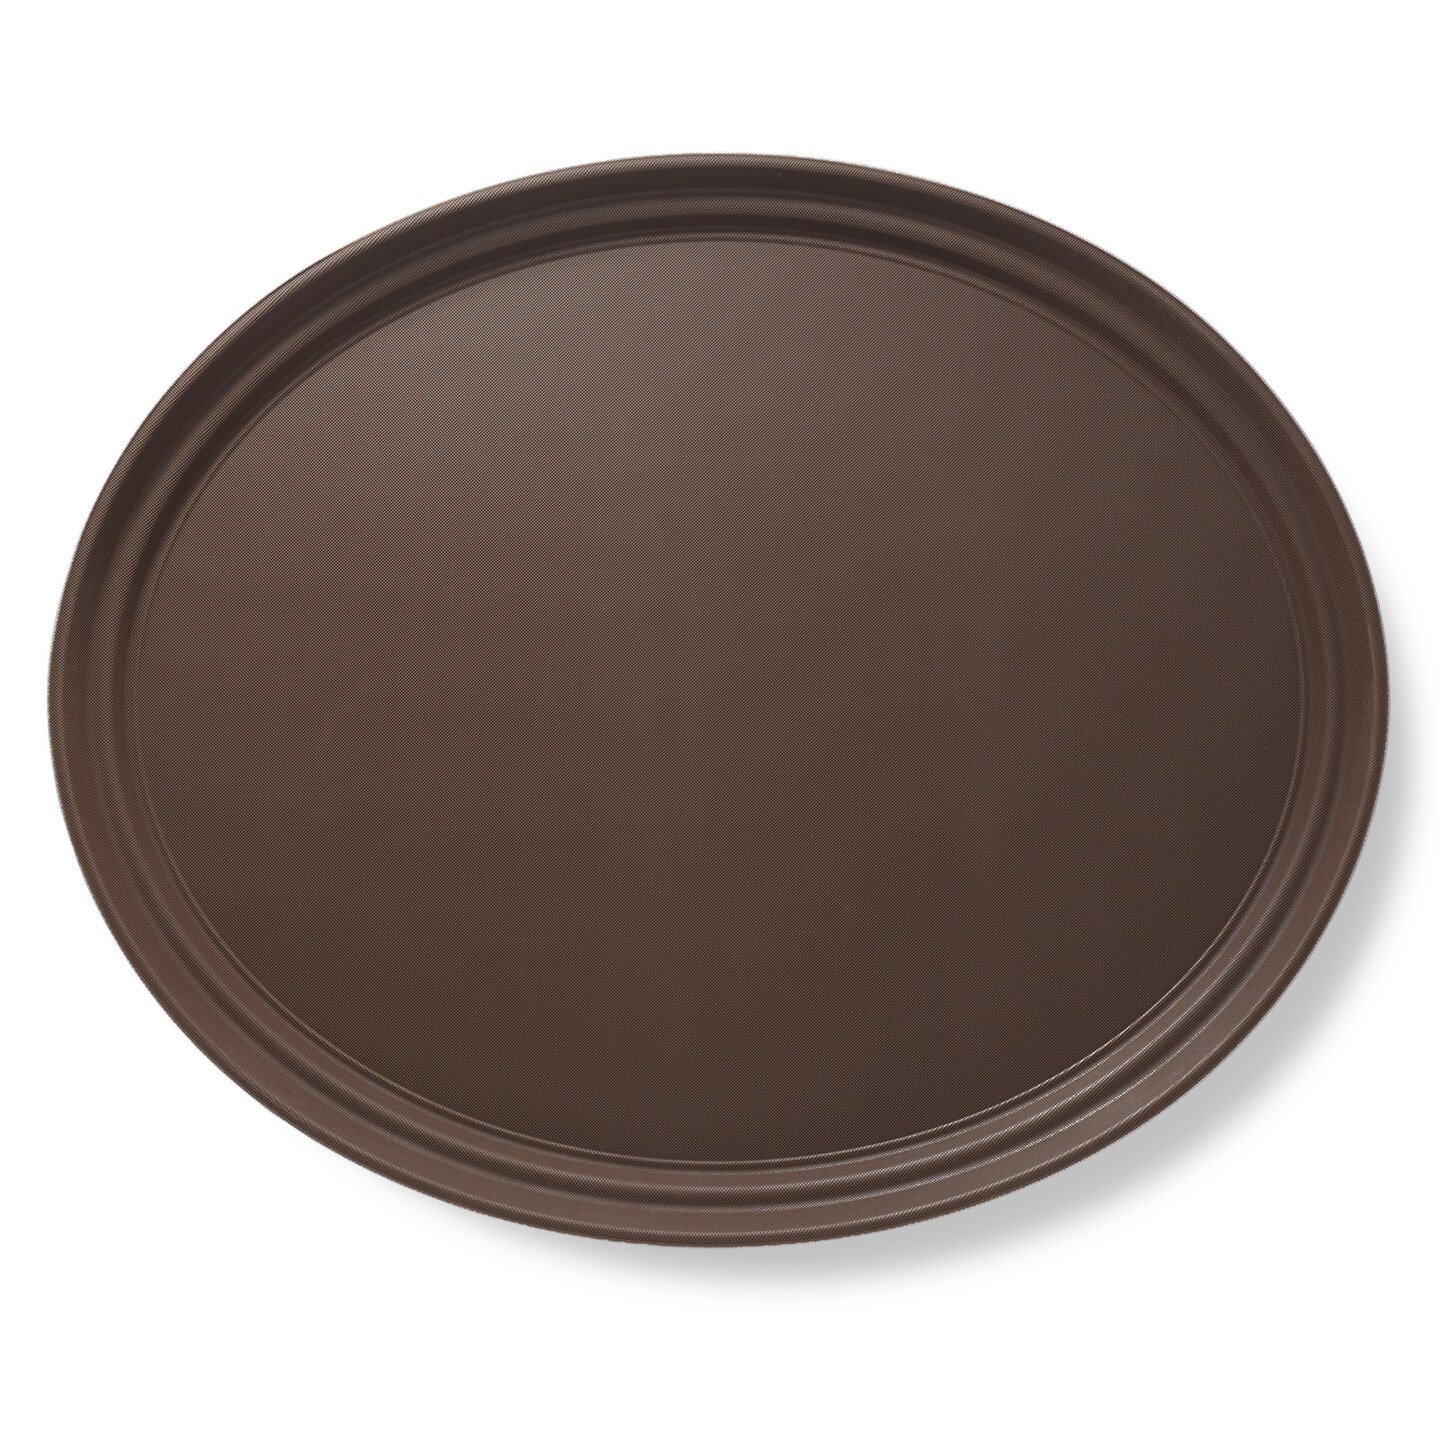 Jubilee Oval Restaurant Serving Trays - NSF Certified Non-Slip Food Service Tray